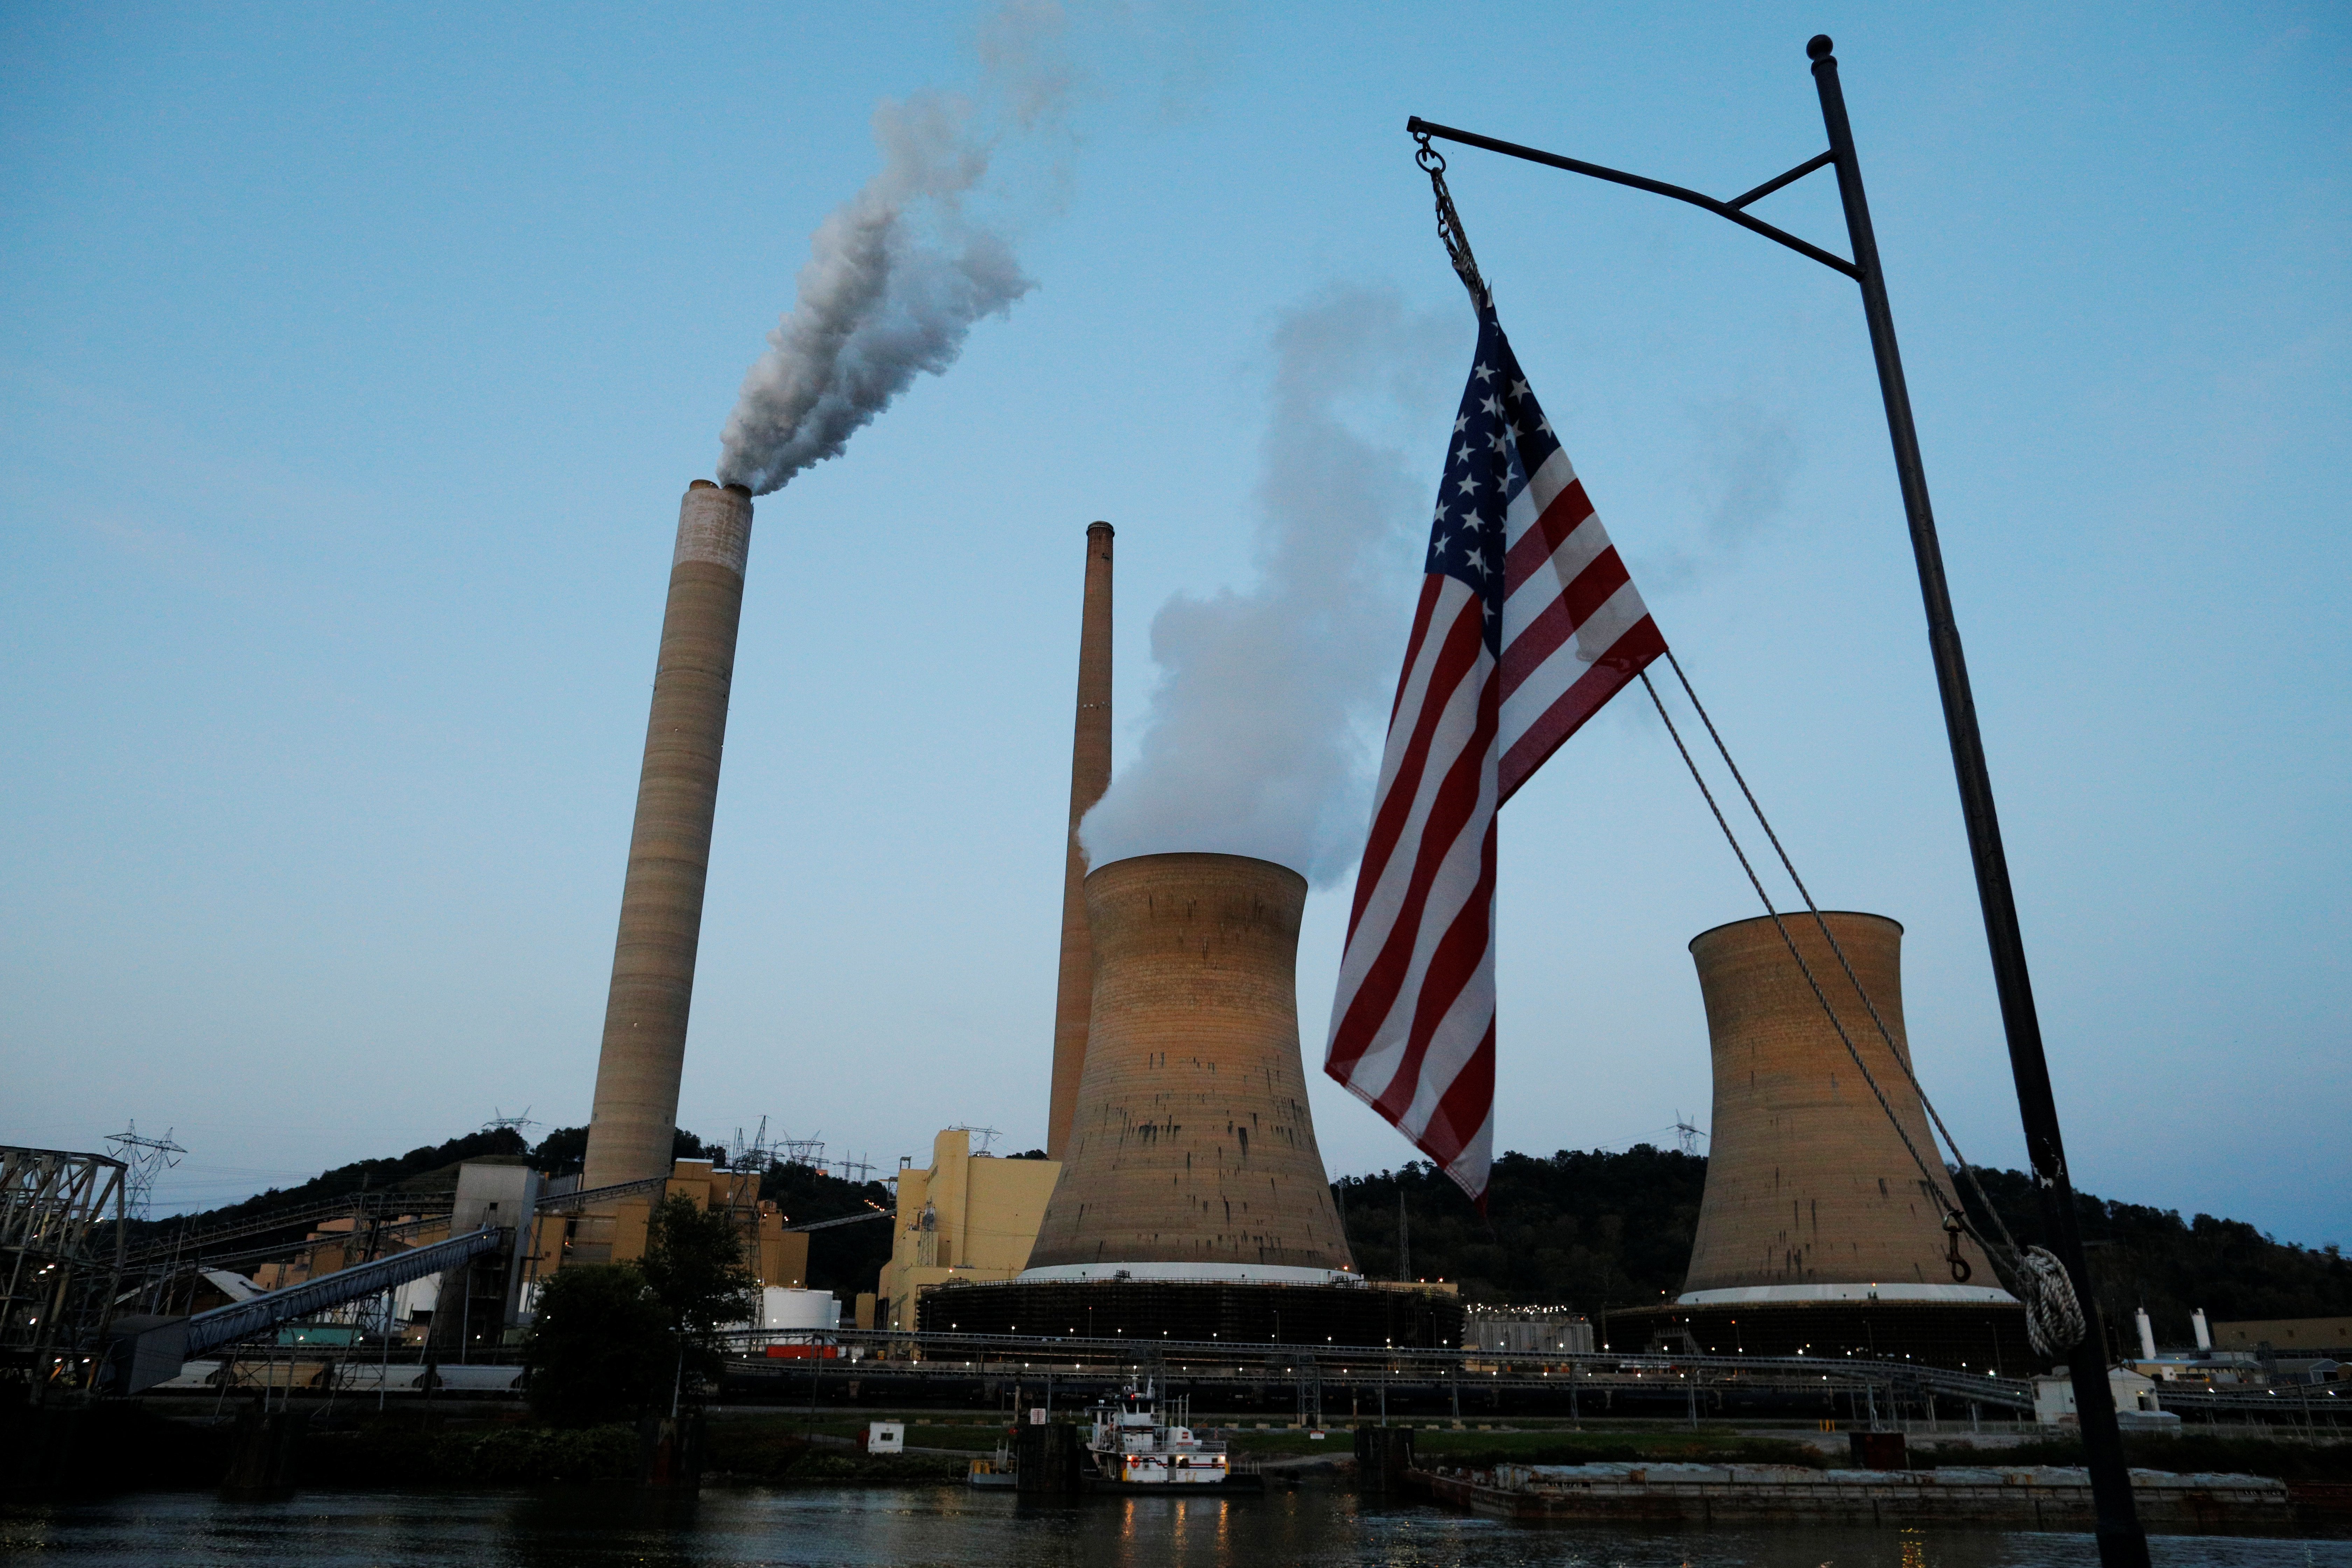 The U.S. flag flies on Campbell Transportation’s towboat M.K. McNally as it passes Mitchell Power Plant, a coal-fired power-plant operated by American Electric Power (AEP), on the Ohio River in Moundsville, West Virginia, U.S., Sept. 10, 2017. REUTERS/Brian Snyder